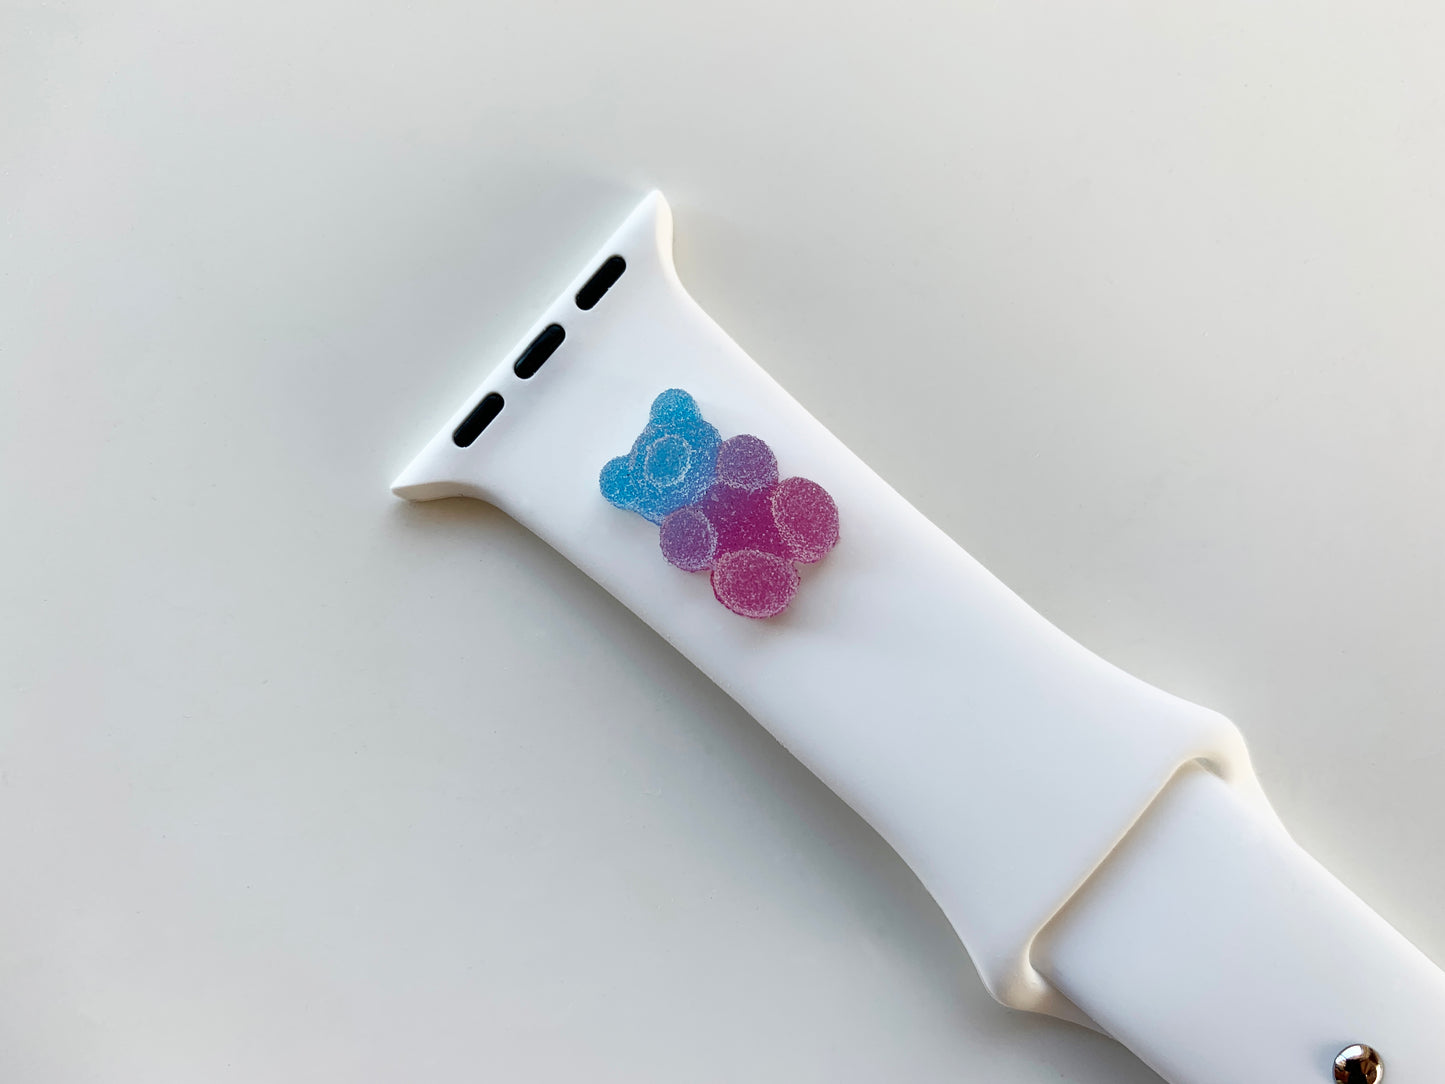 A small blue and purple 3D printed gummy bear attached to a white silicon watch for the apple watch